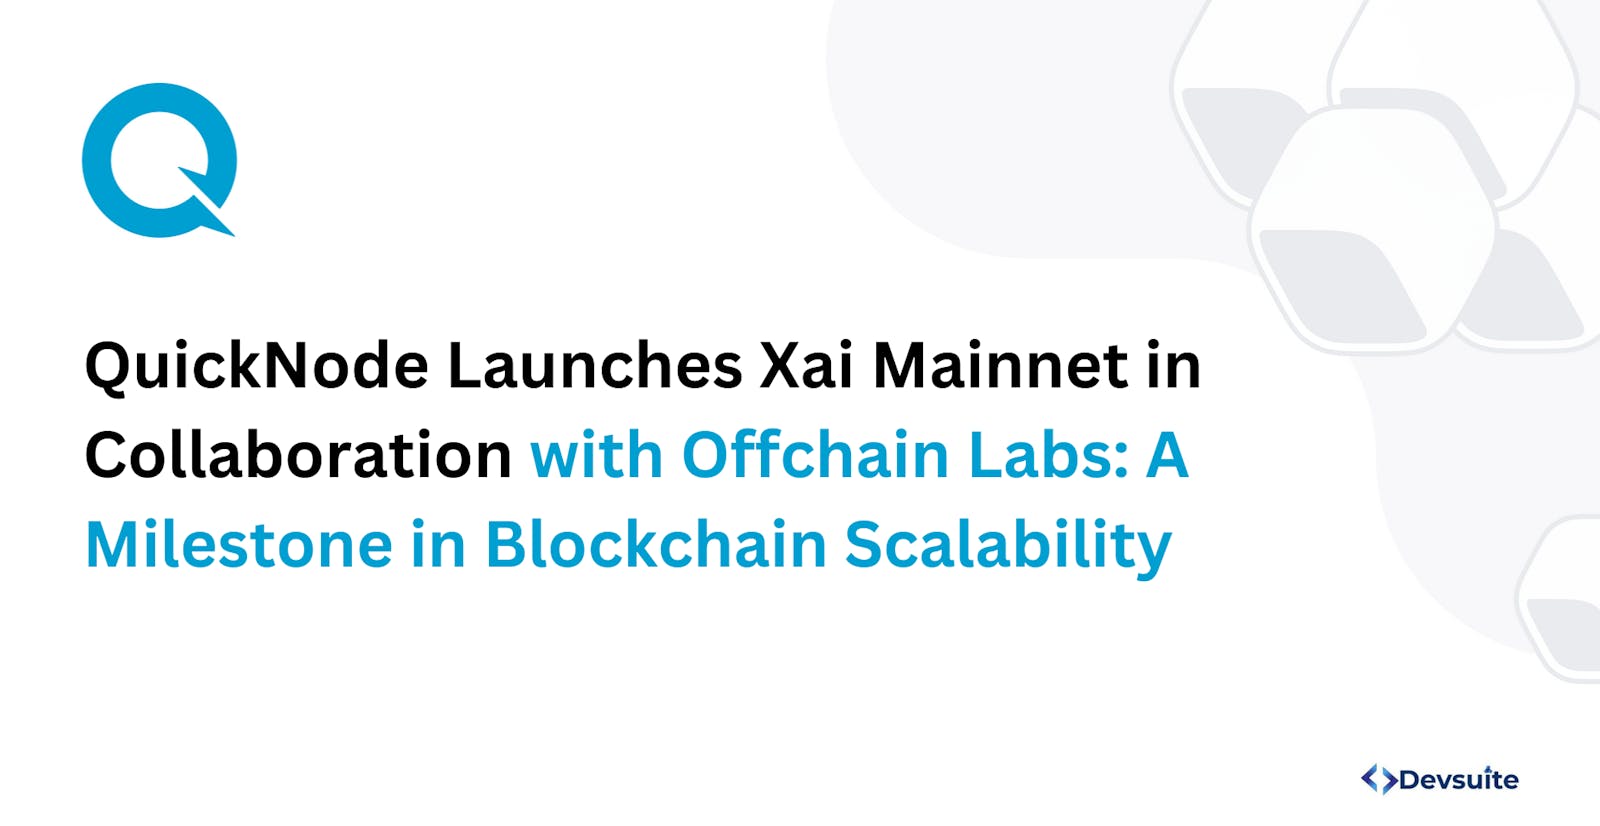 QuickNode Launches Xai Mainnet in Collaboration with Offchain Labs: A Milestone in Blockchain Scalability